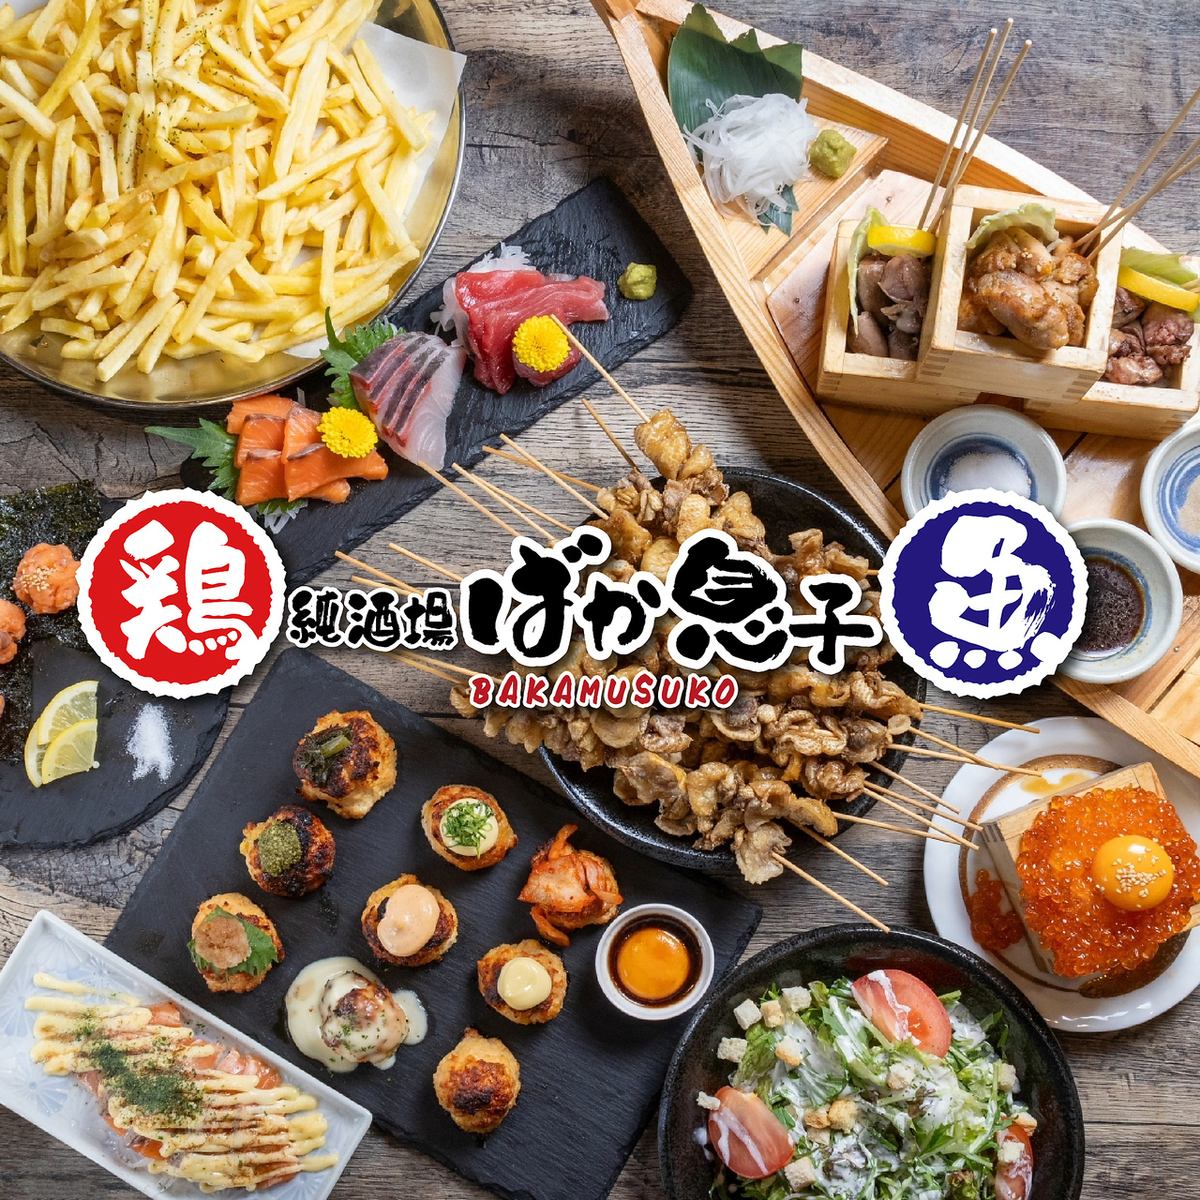 A restaurant where you can eat delicious chicken and seafood at a reasonable price - Baka Musuko - has opened in Kawaramachi!